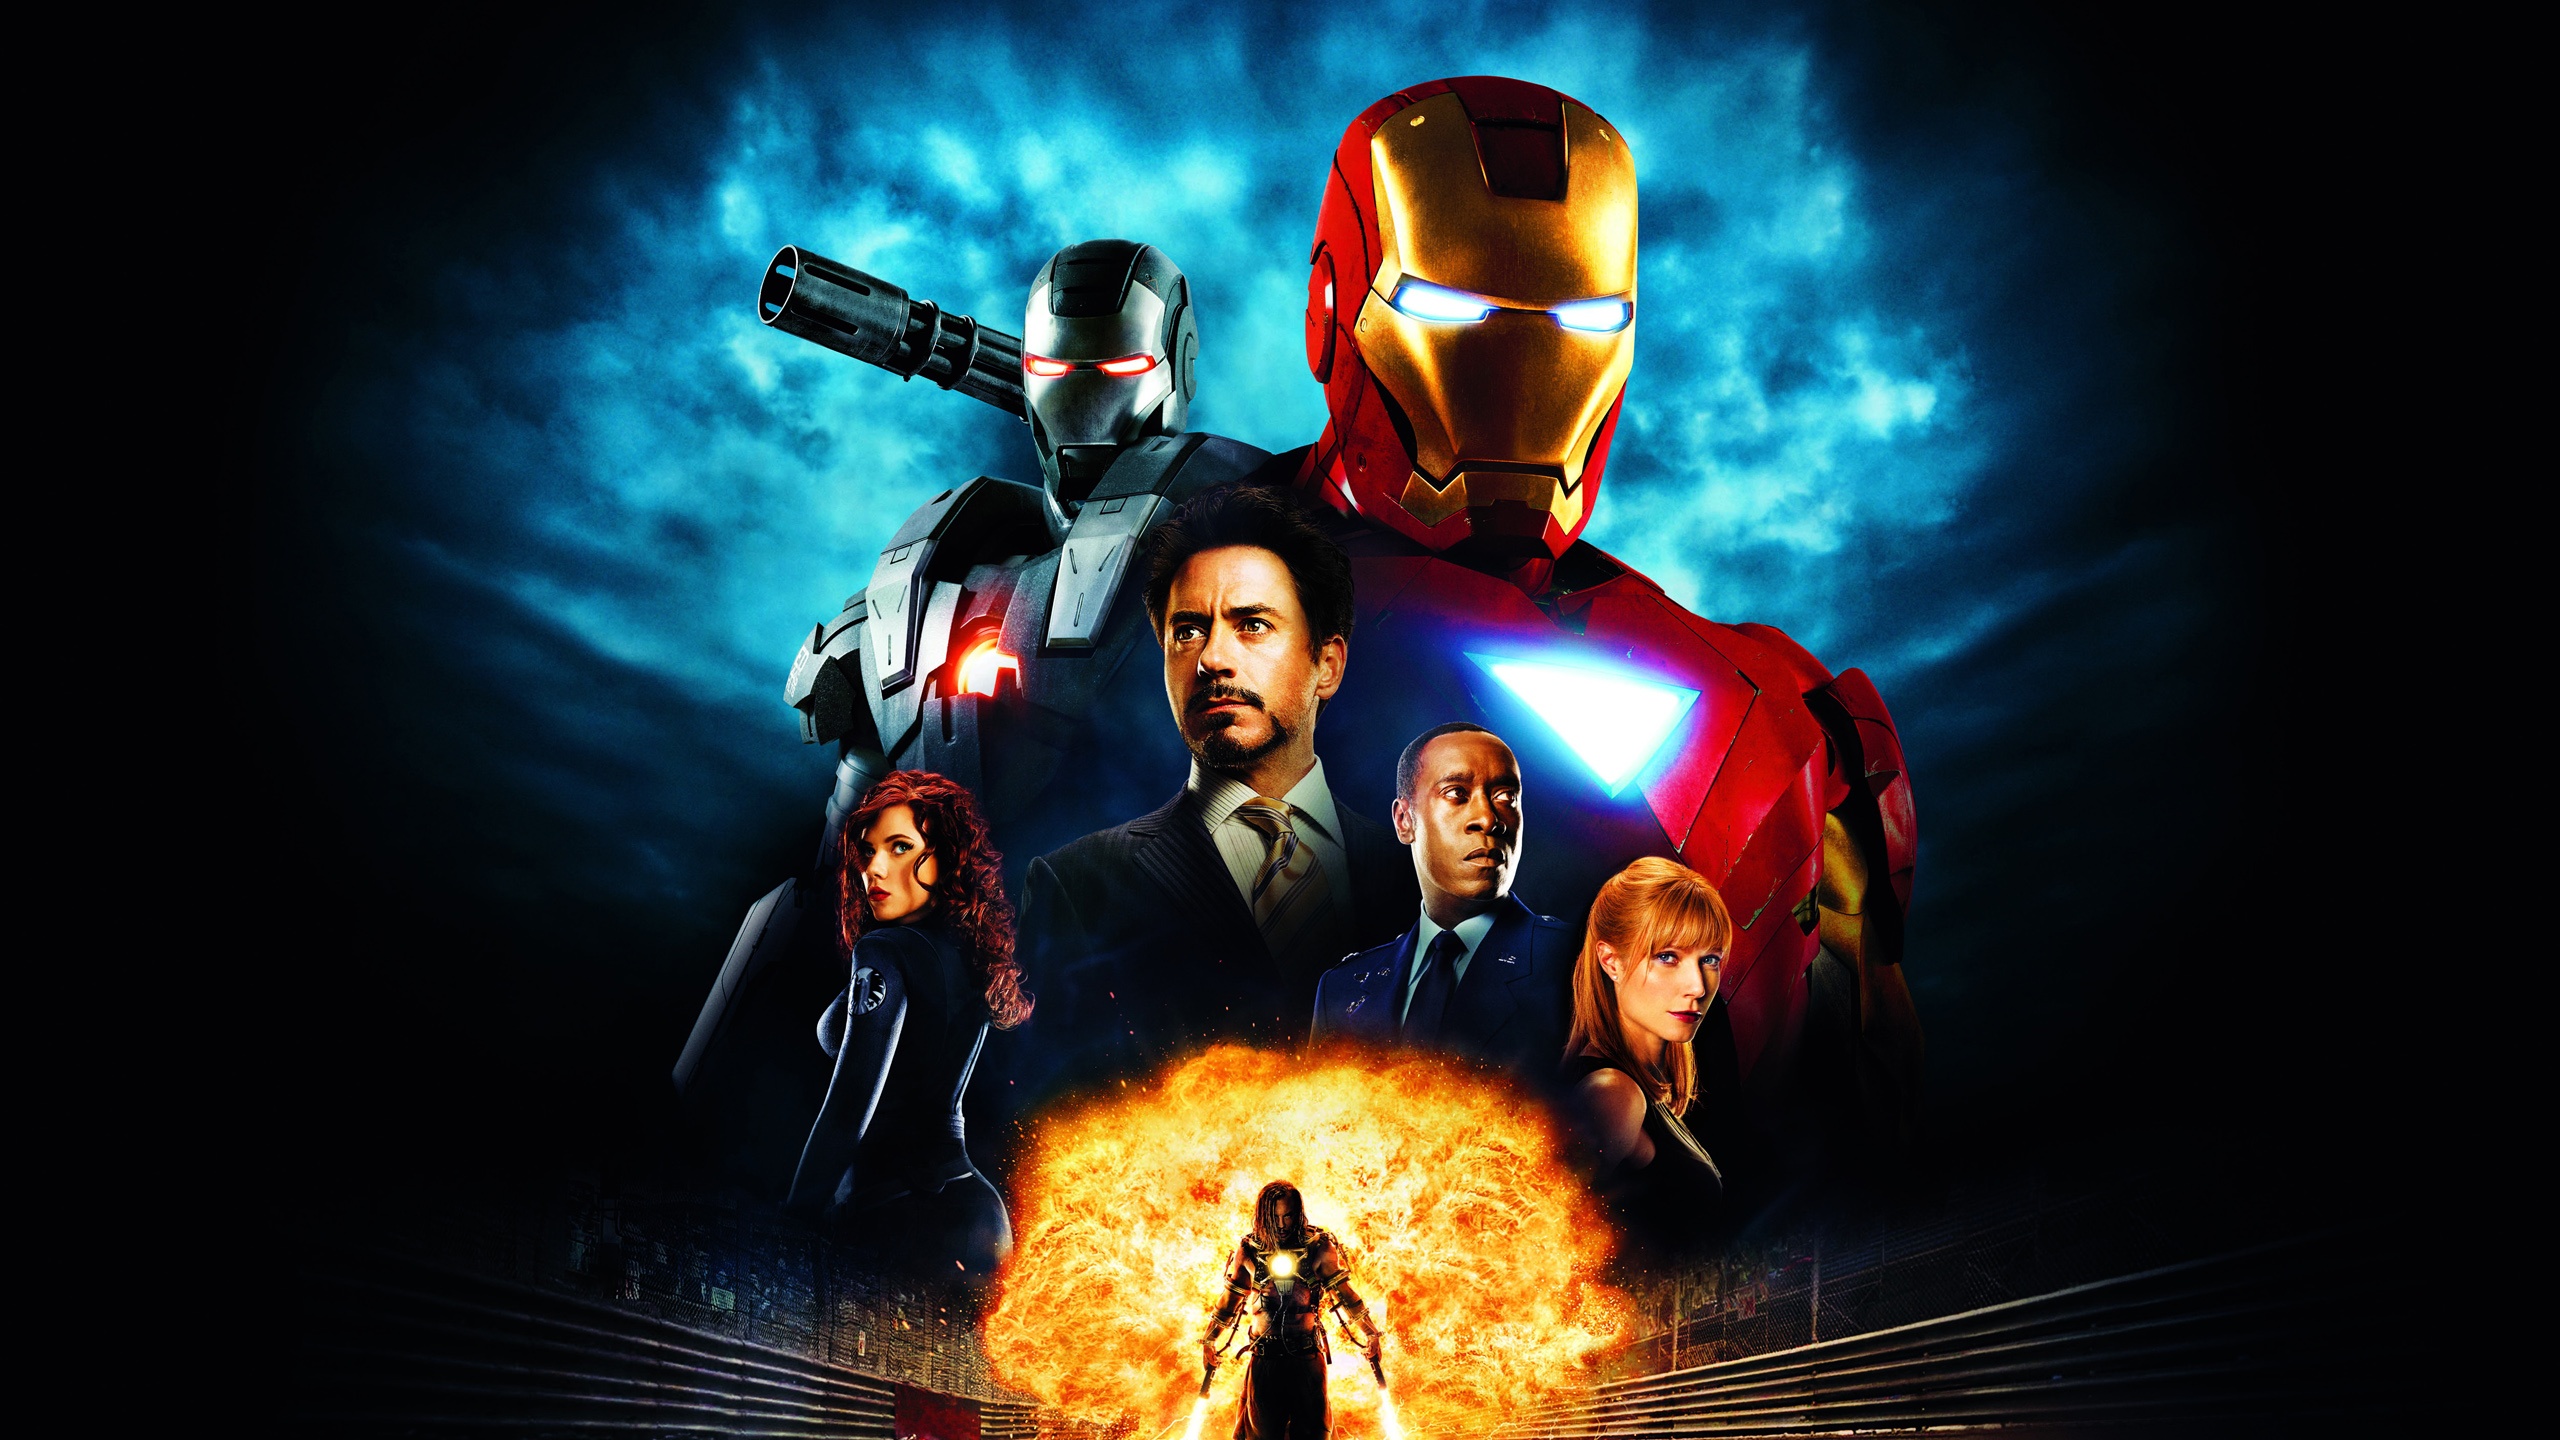 Wallpaper Iron Man hot movie 2560x1600 HD Picture, Image